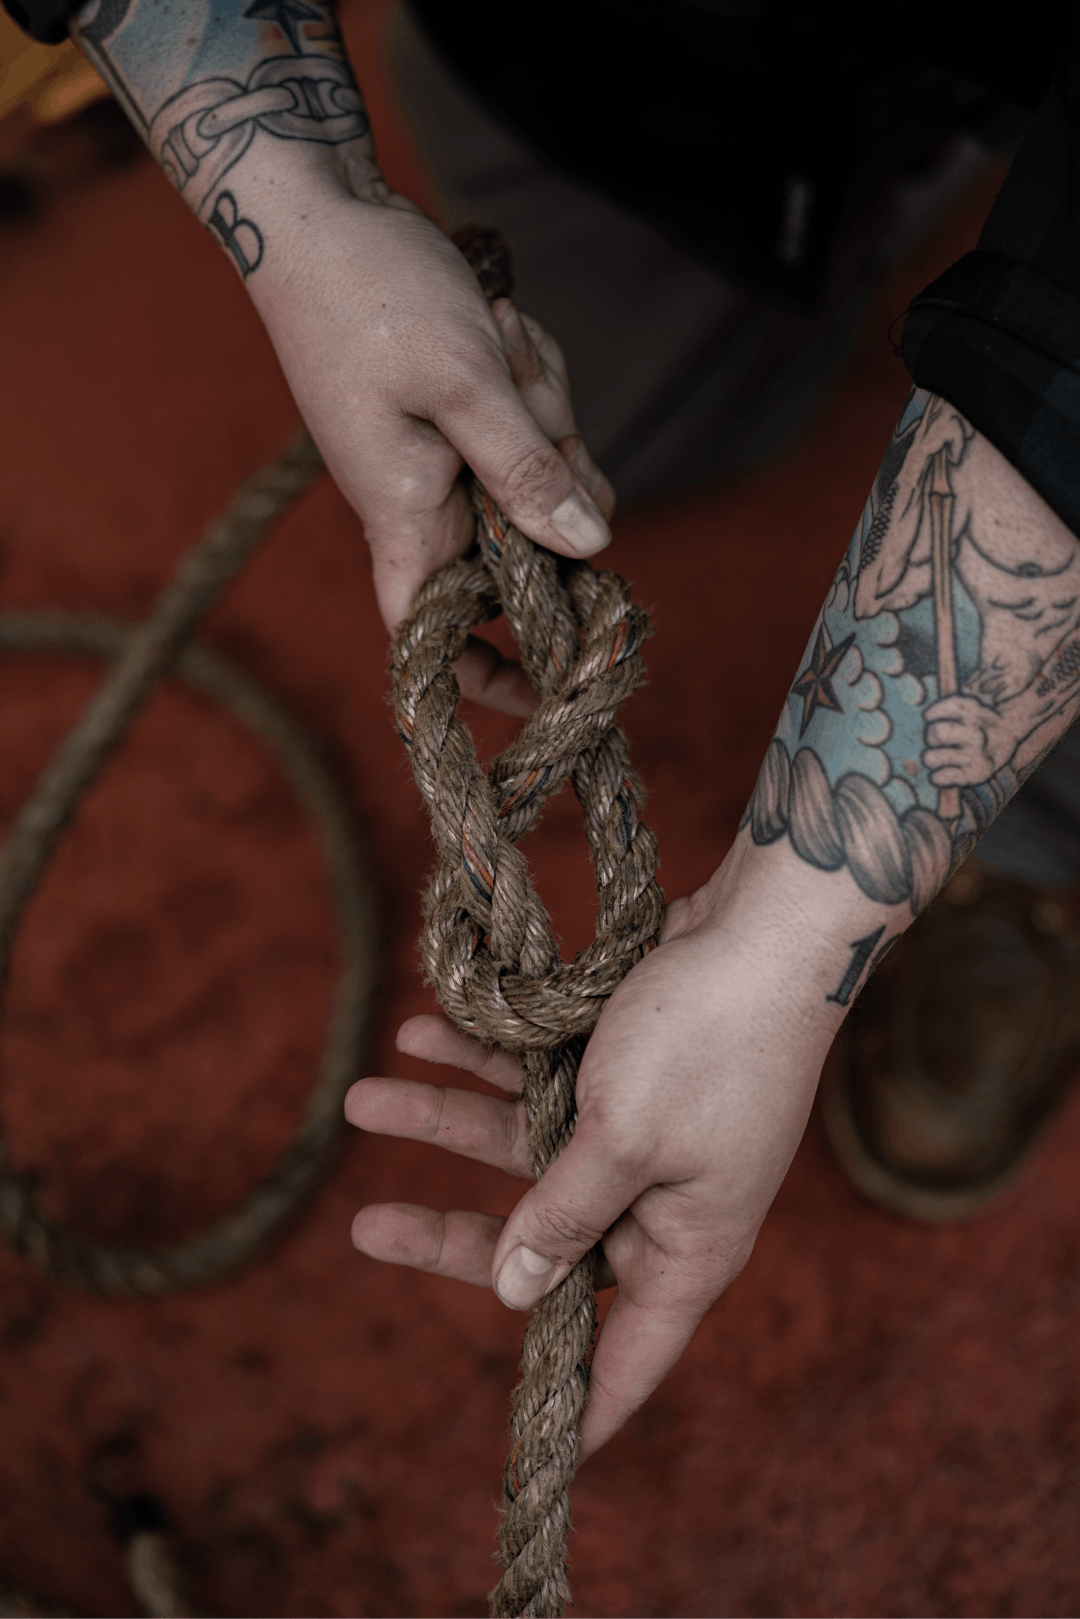 The History and Meaning of Maritime Tattoos